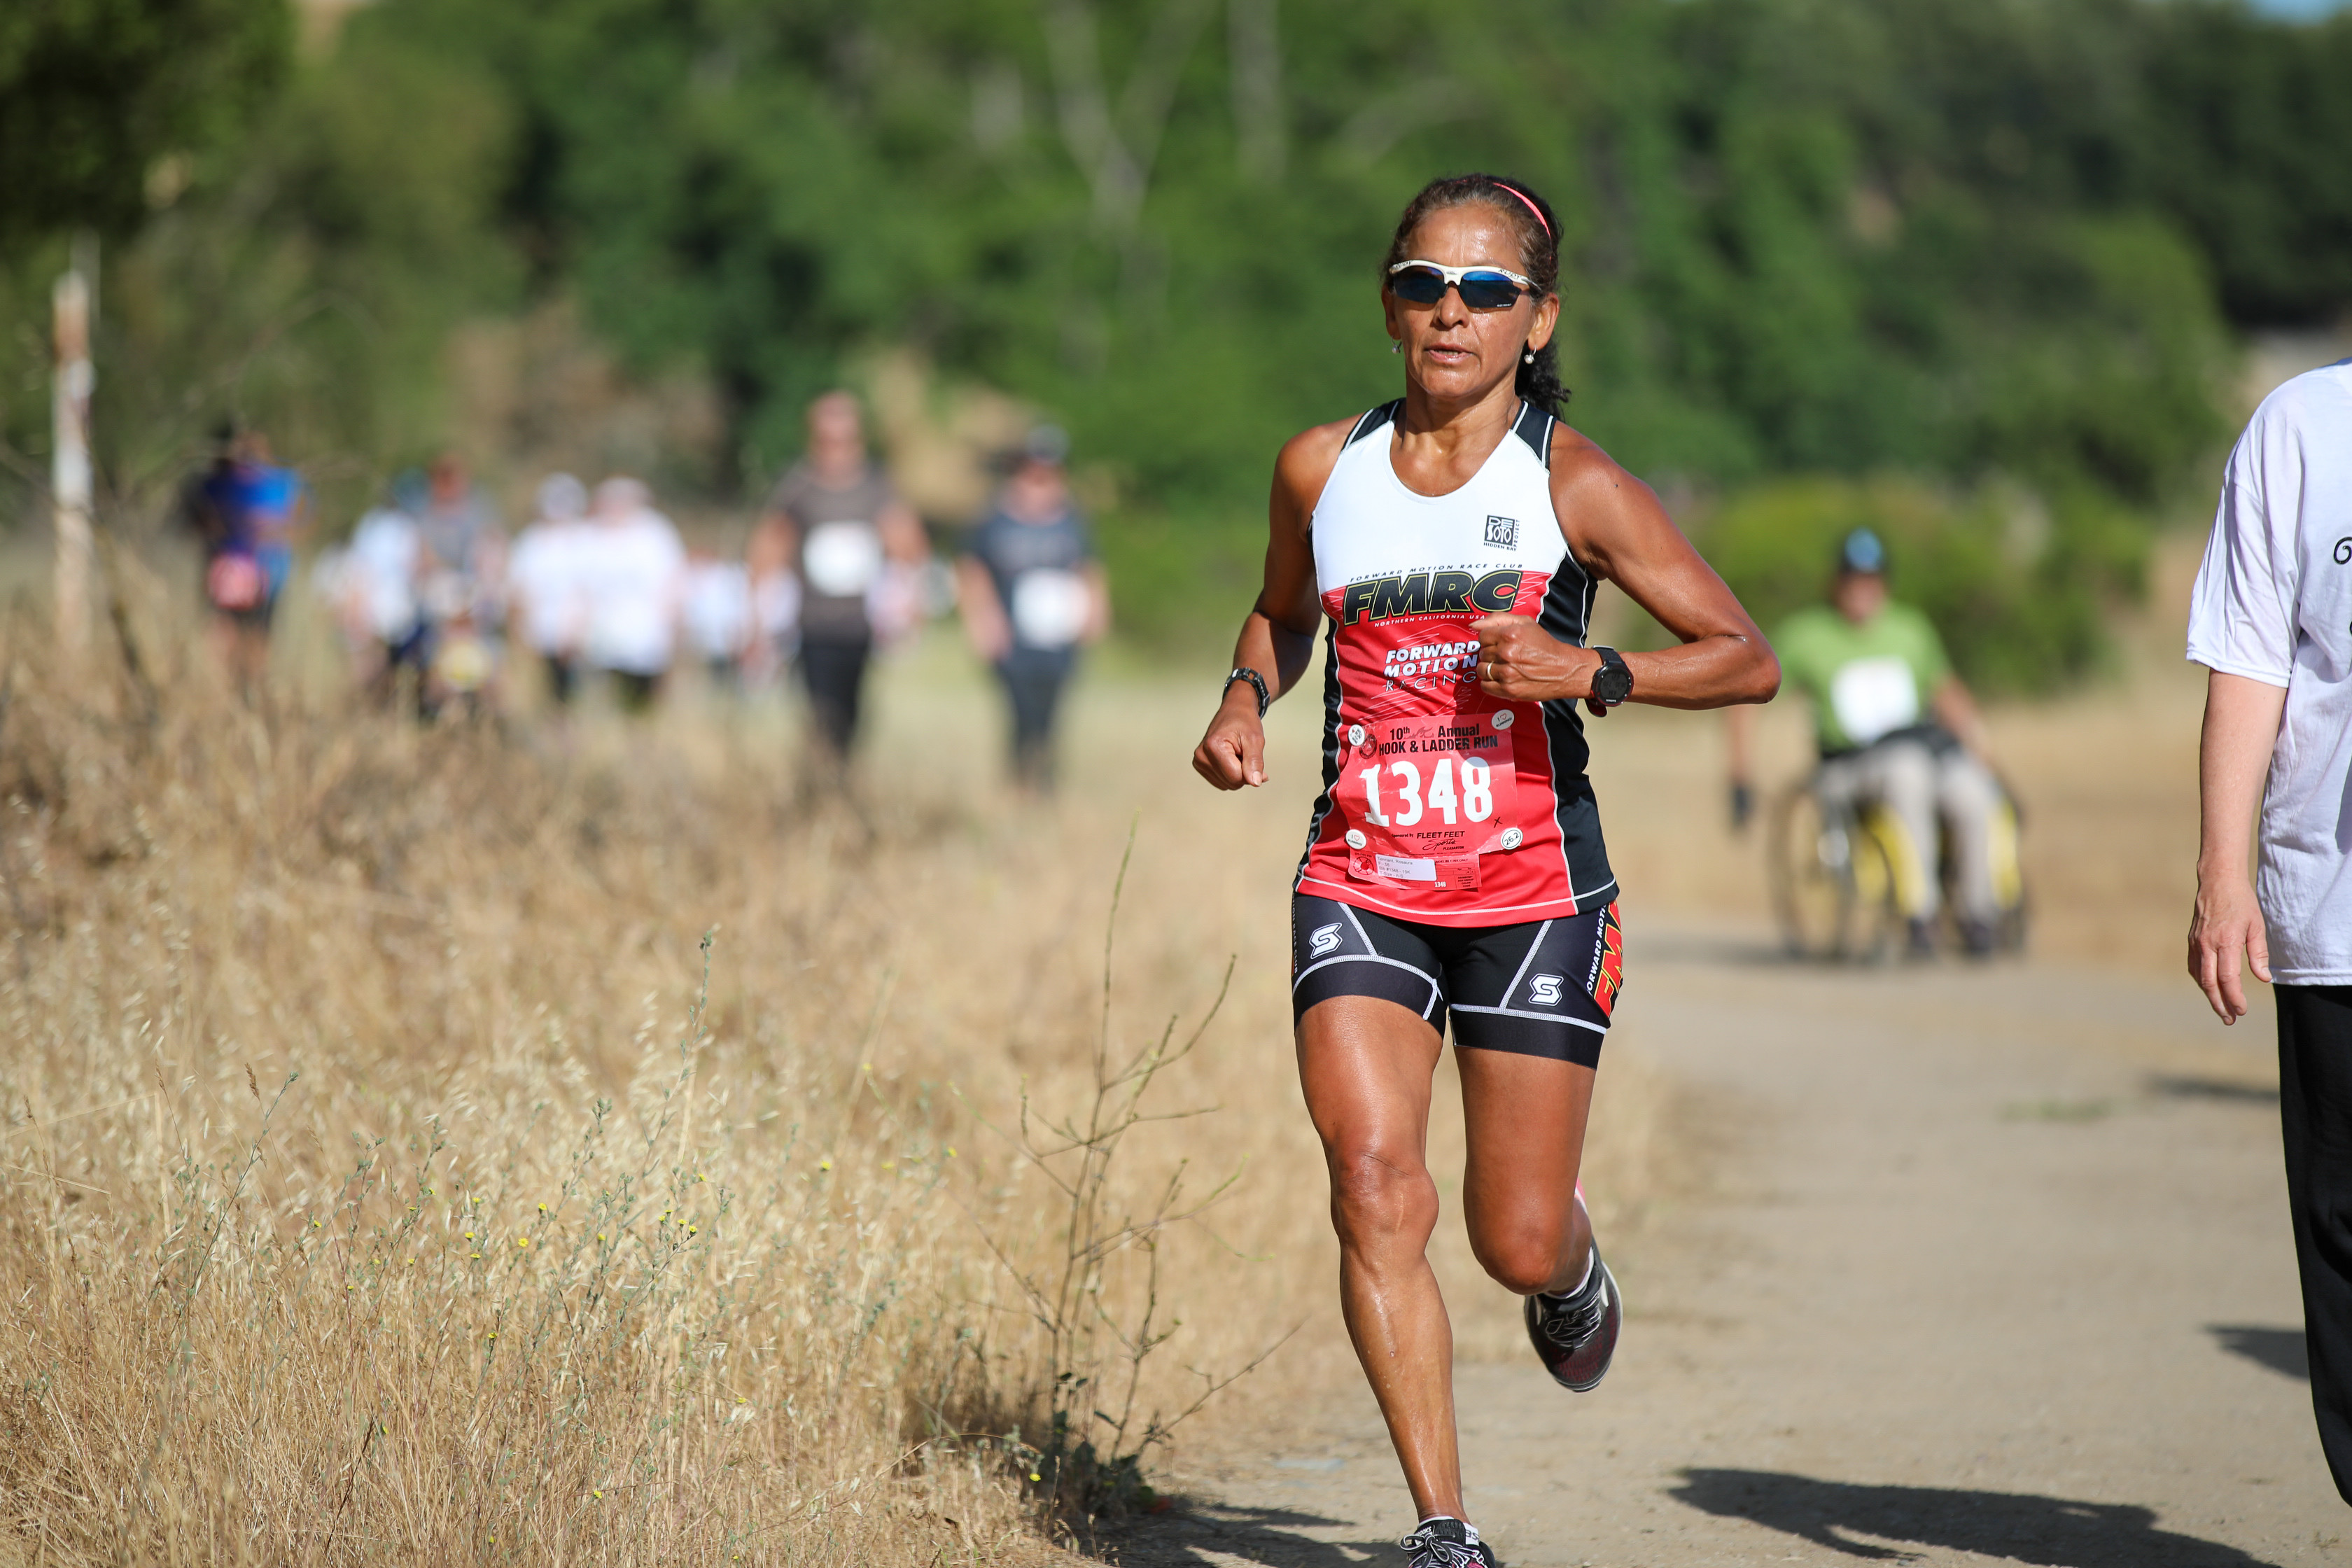 Global Run Challenge Profile: Rosaura Tennant says running is like a vitamin or medicine done daily